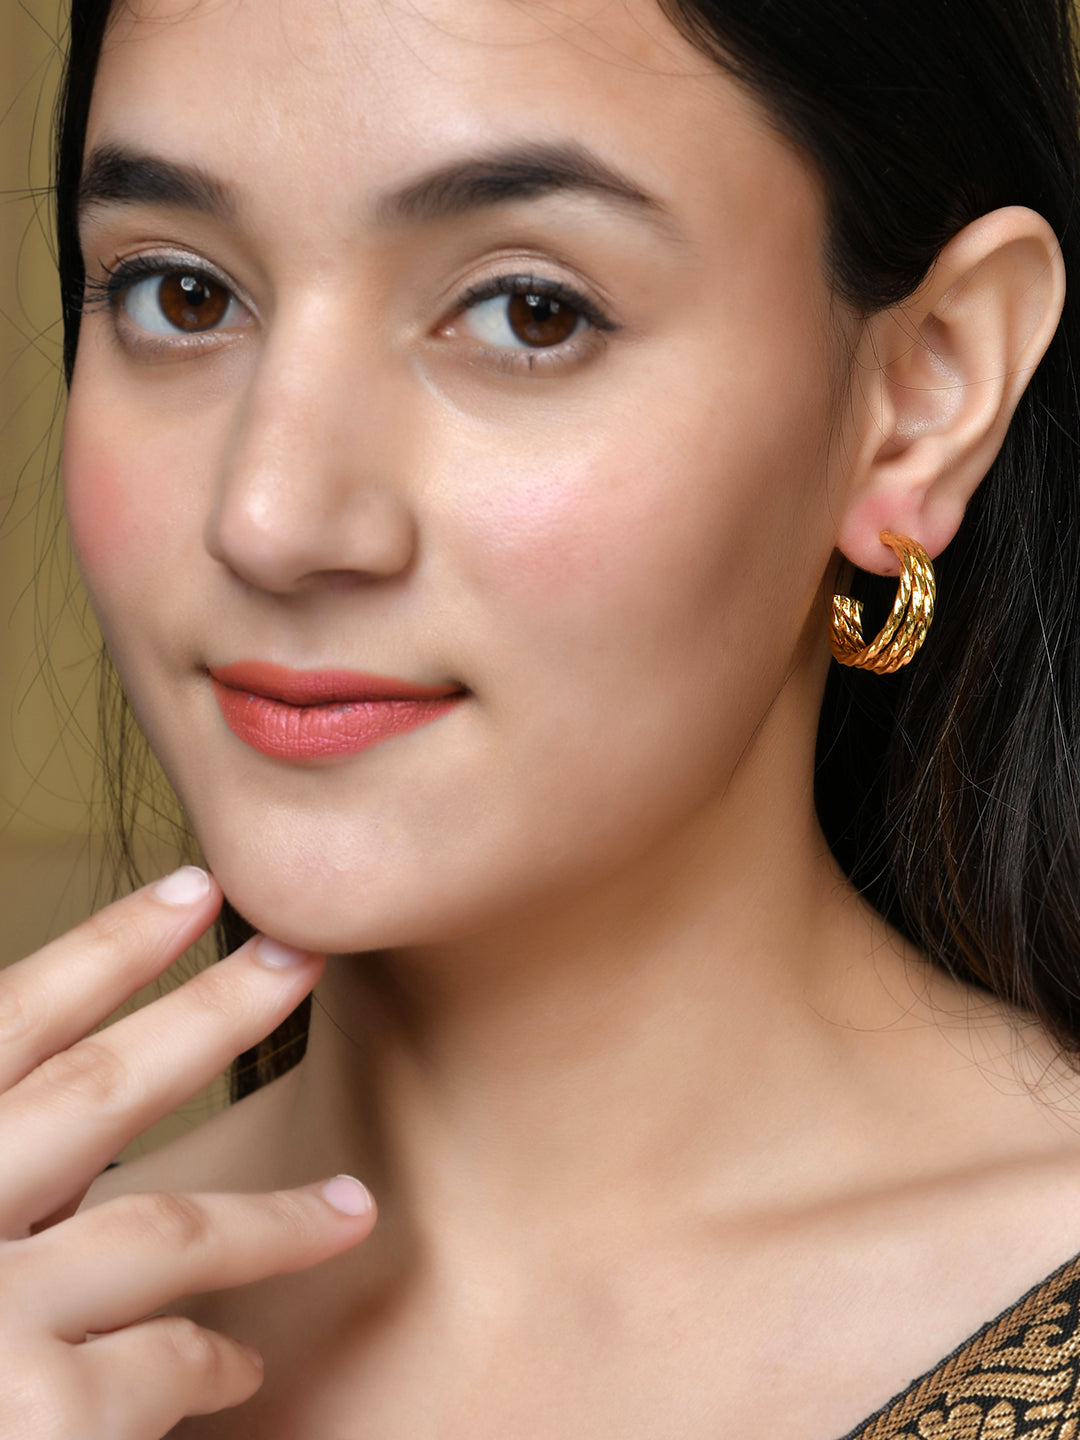 style with these stunning Gold Plated Women's Hoop Earrings. Made with expert craftsmanship and high-quality materials, these earrings will complement any outfit.